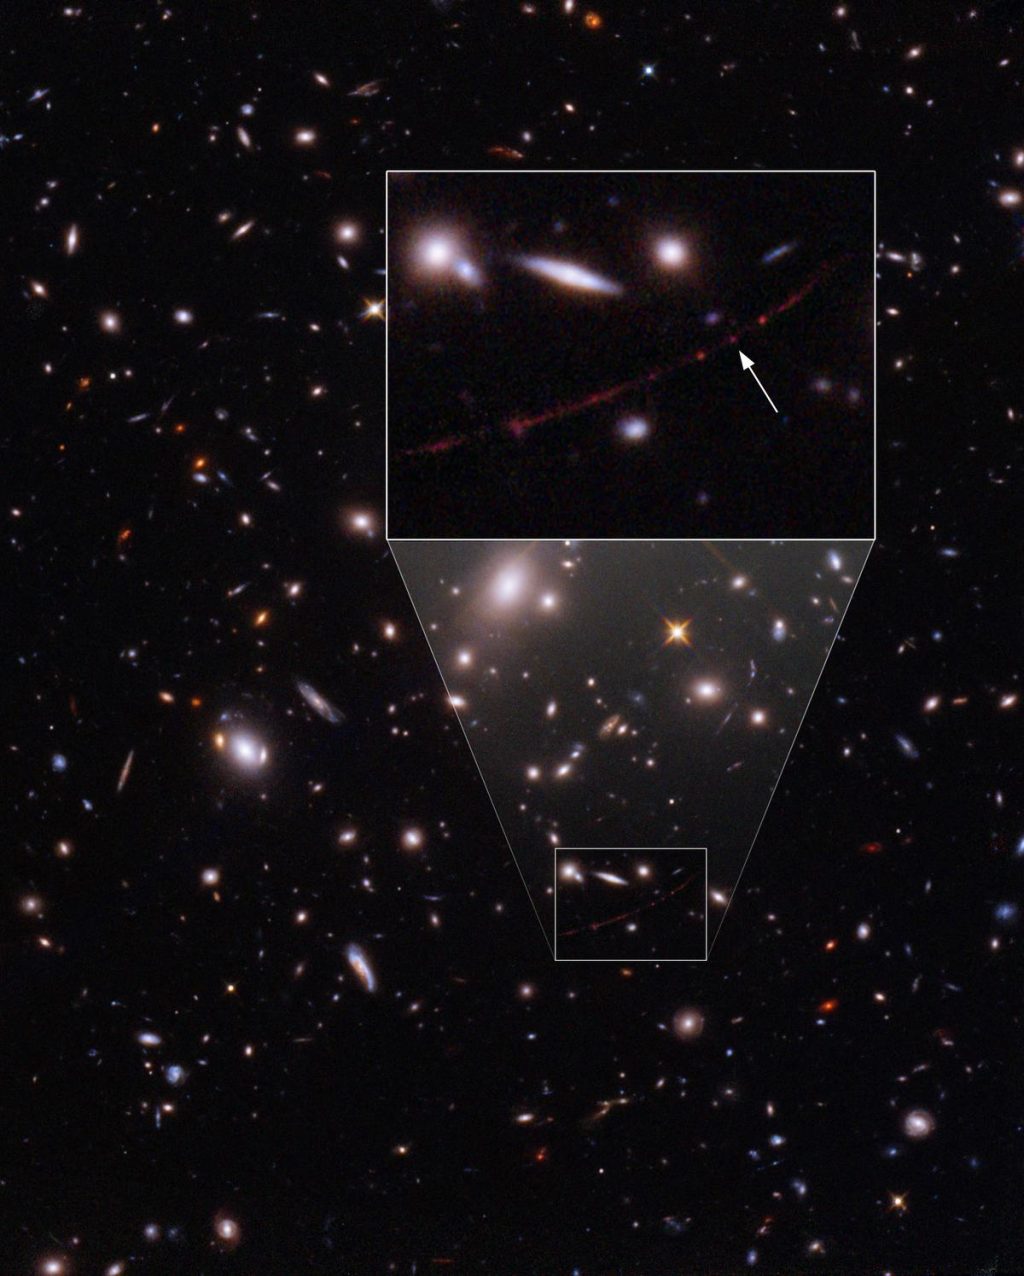 The Hubble Space Telescope detects the farthest star ever observed